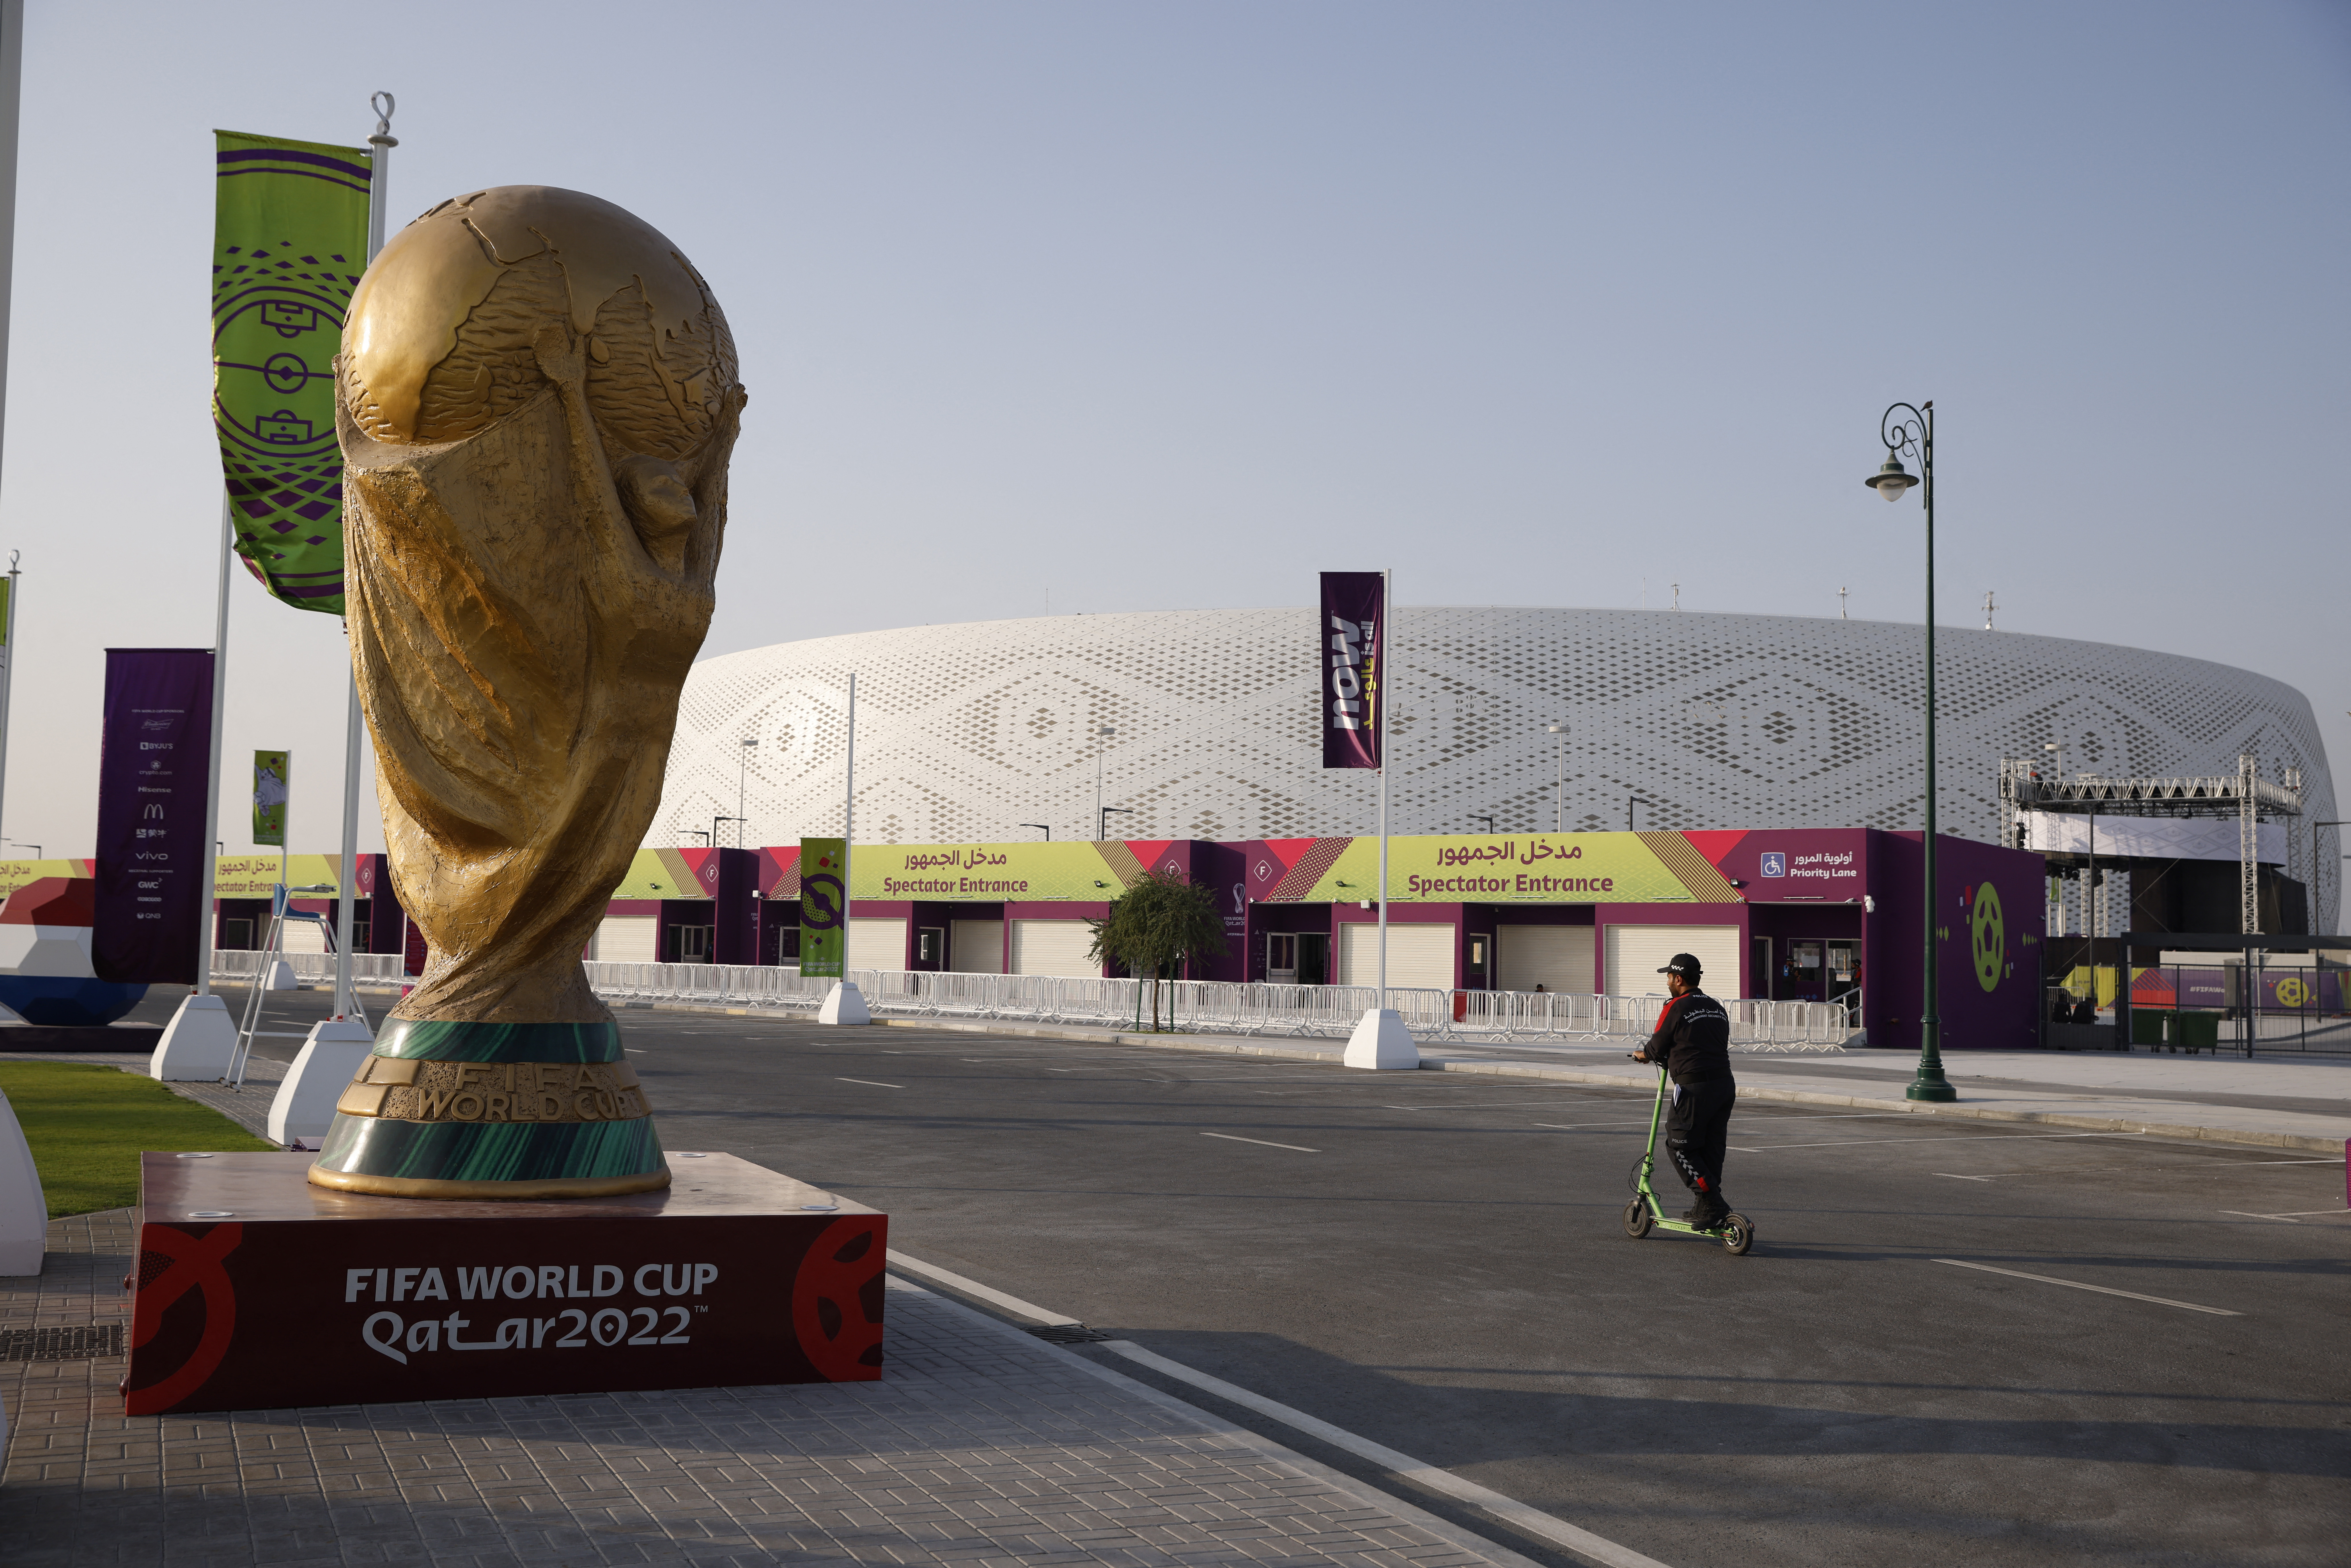 World Cup 2022 fixtures: full schedule of games and kick-off times